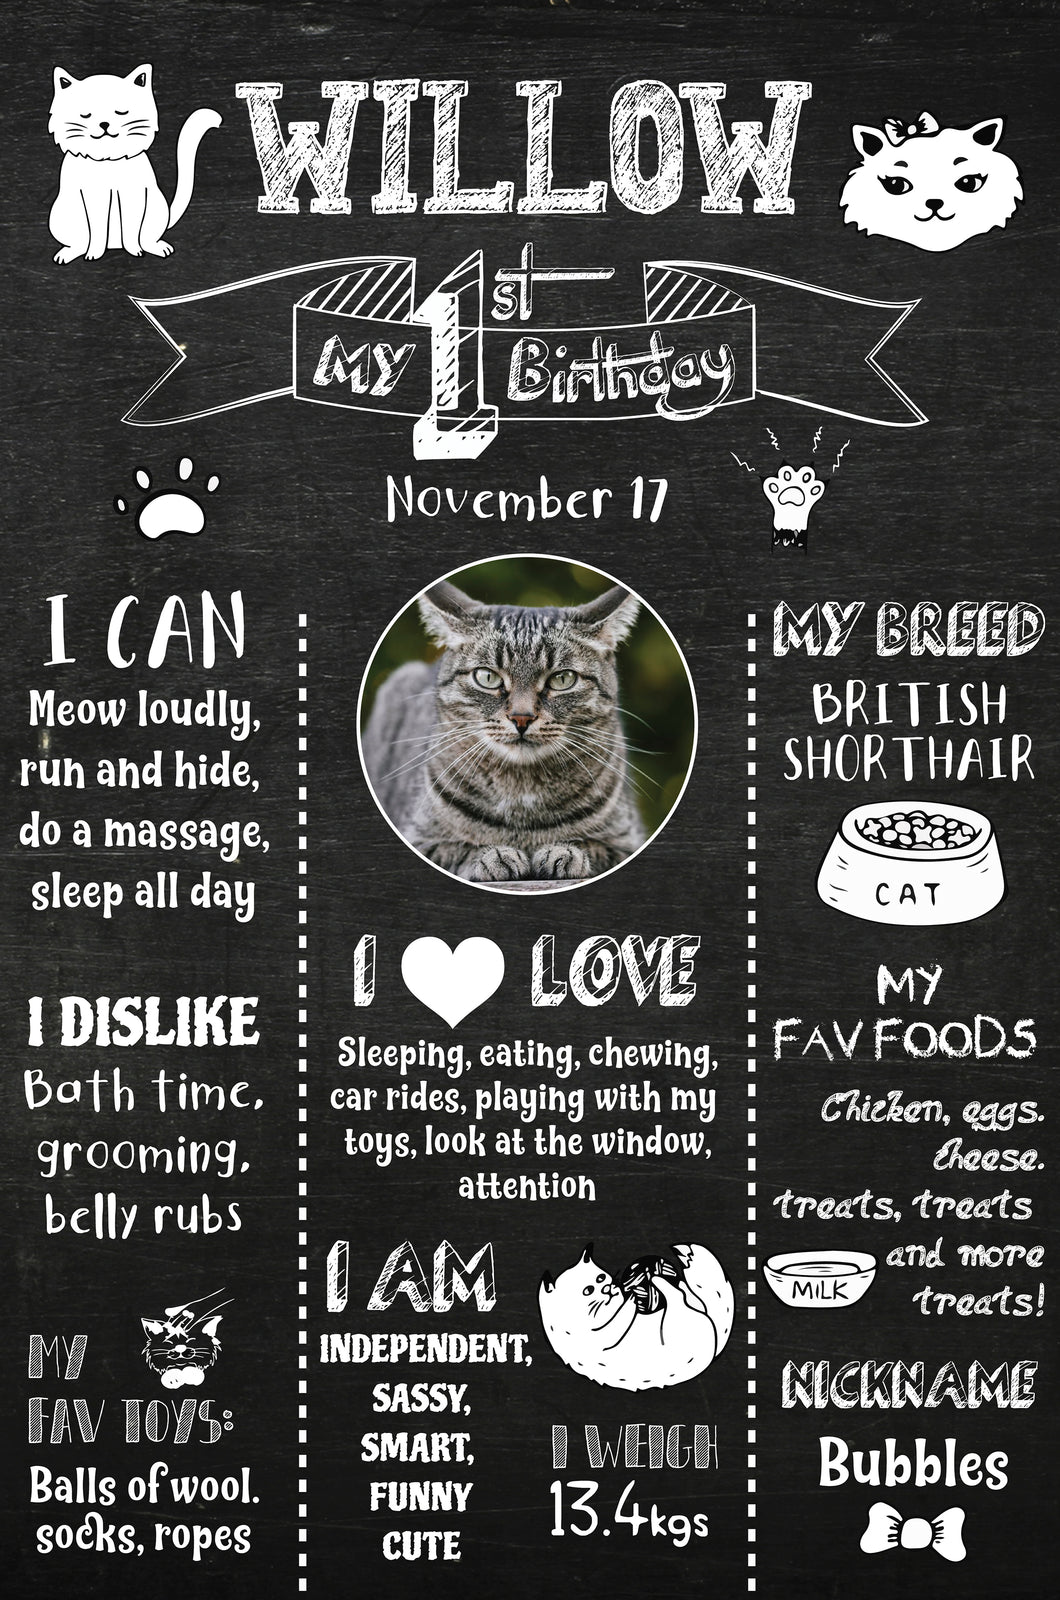 Snow Fair - Cat Birthday Customized Chalkboard / Milestone Board for Kids Birthday Party - Made of MDF Wooden Board